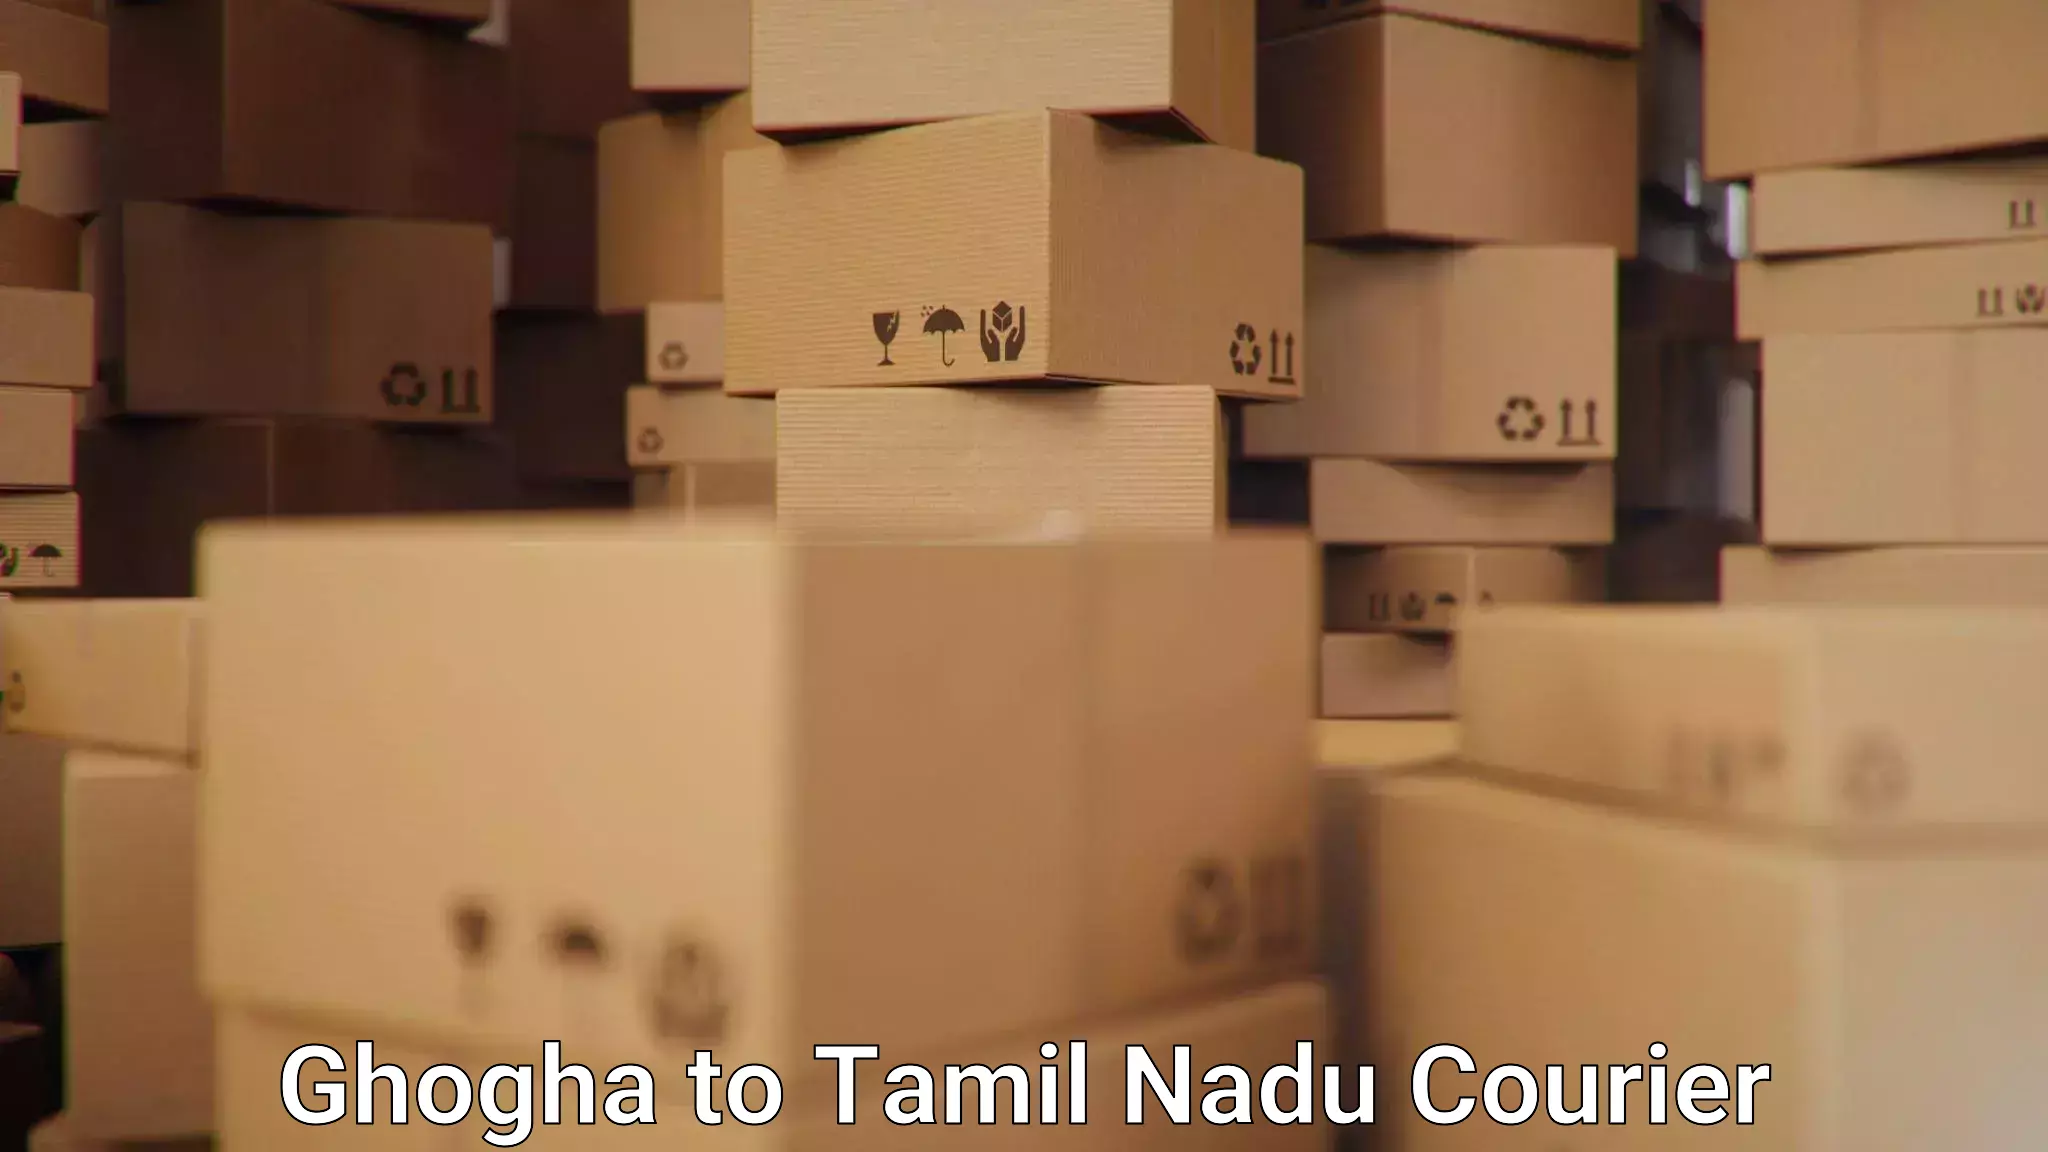 State-of-the-art courier technology Ghogha to Papanasam